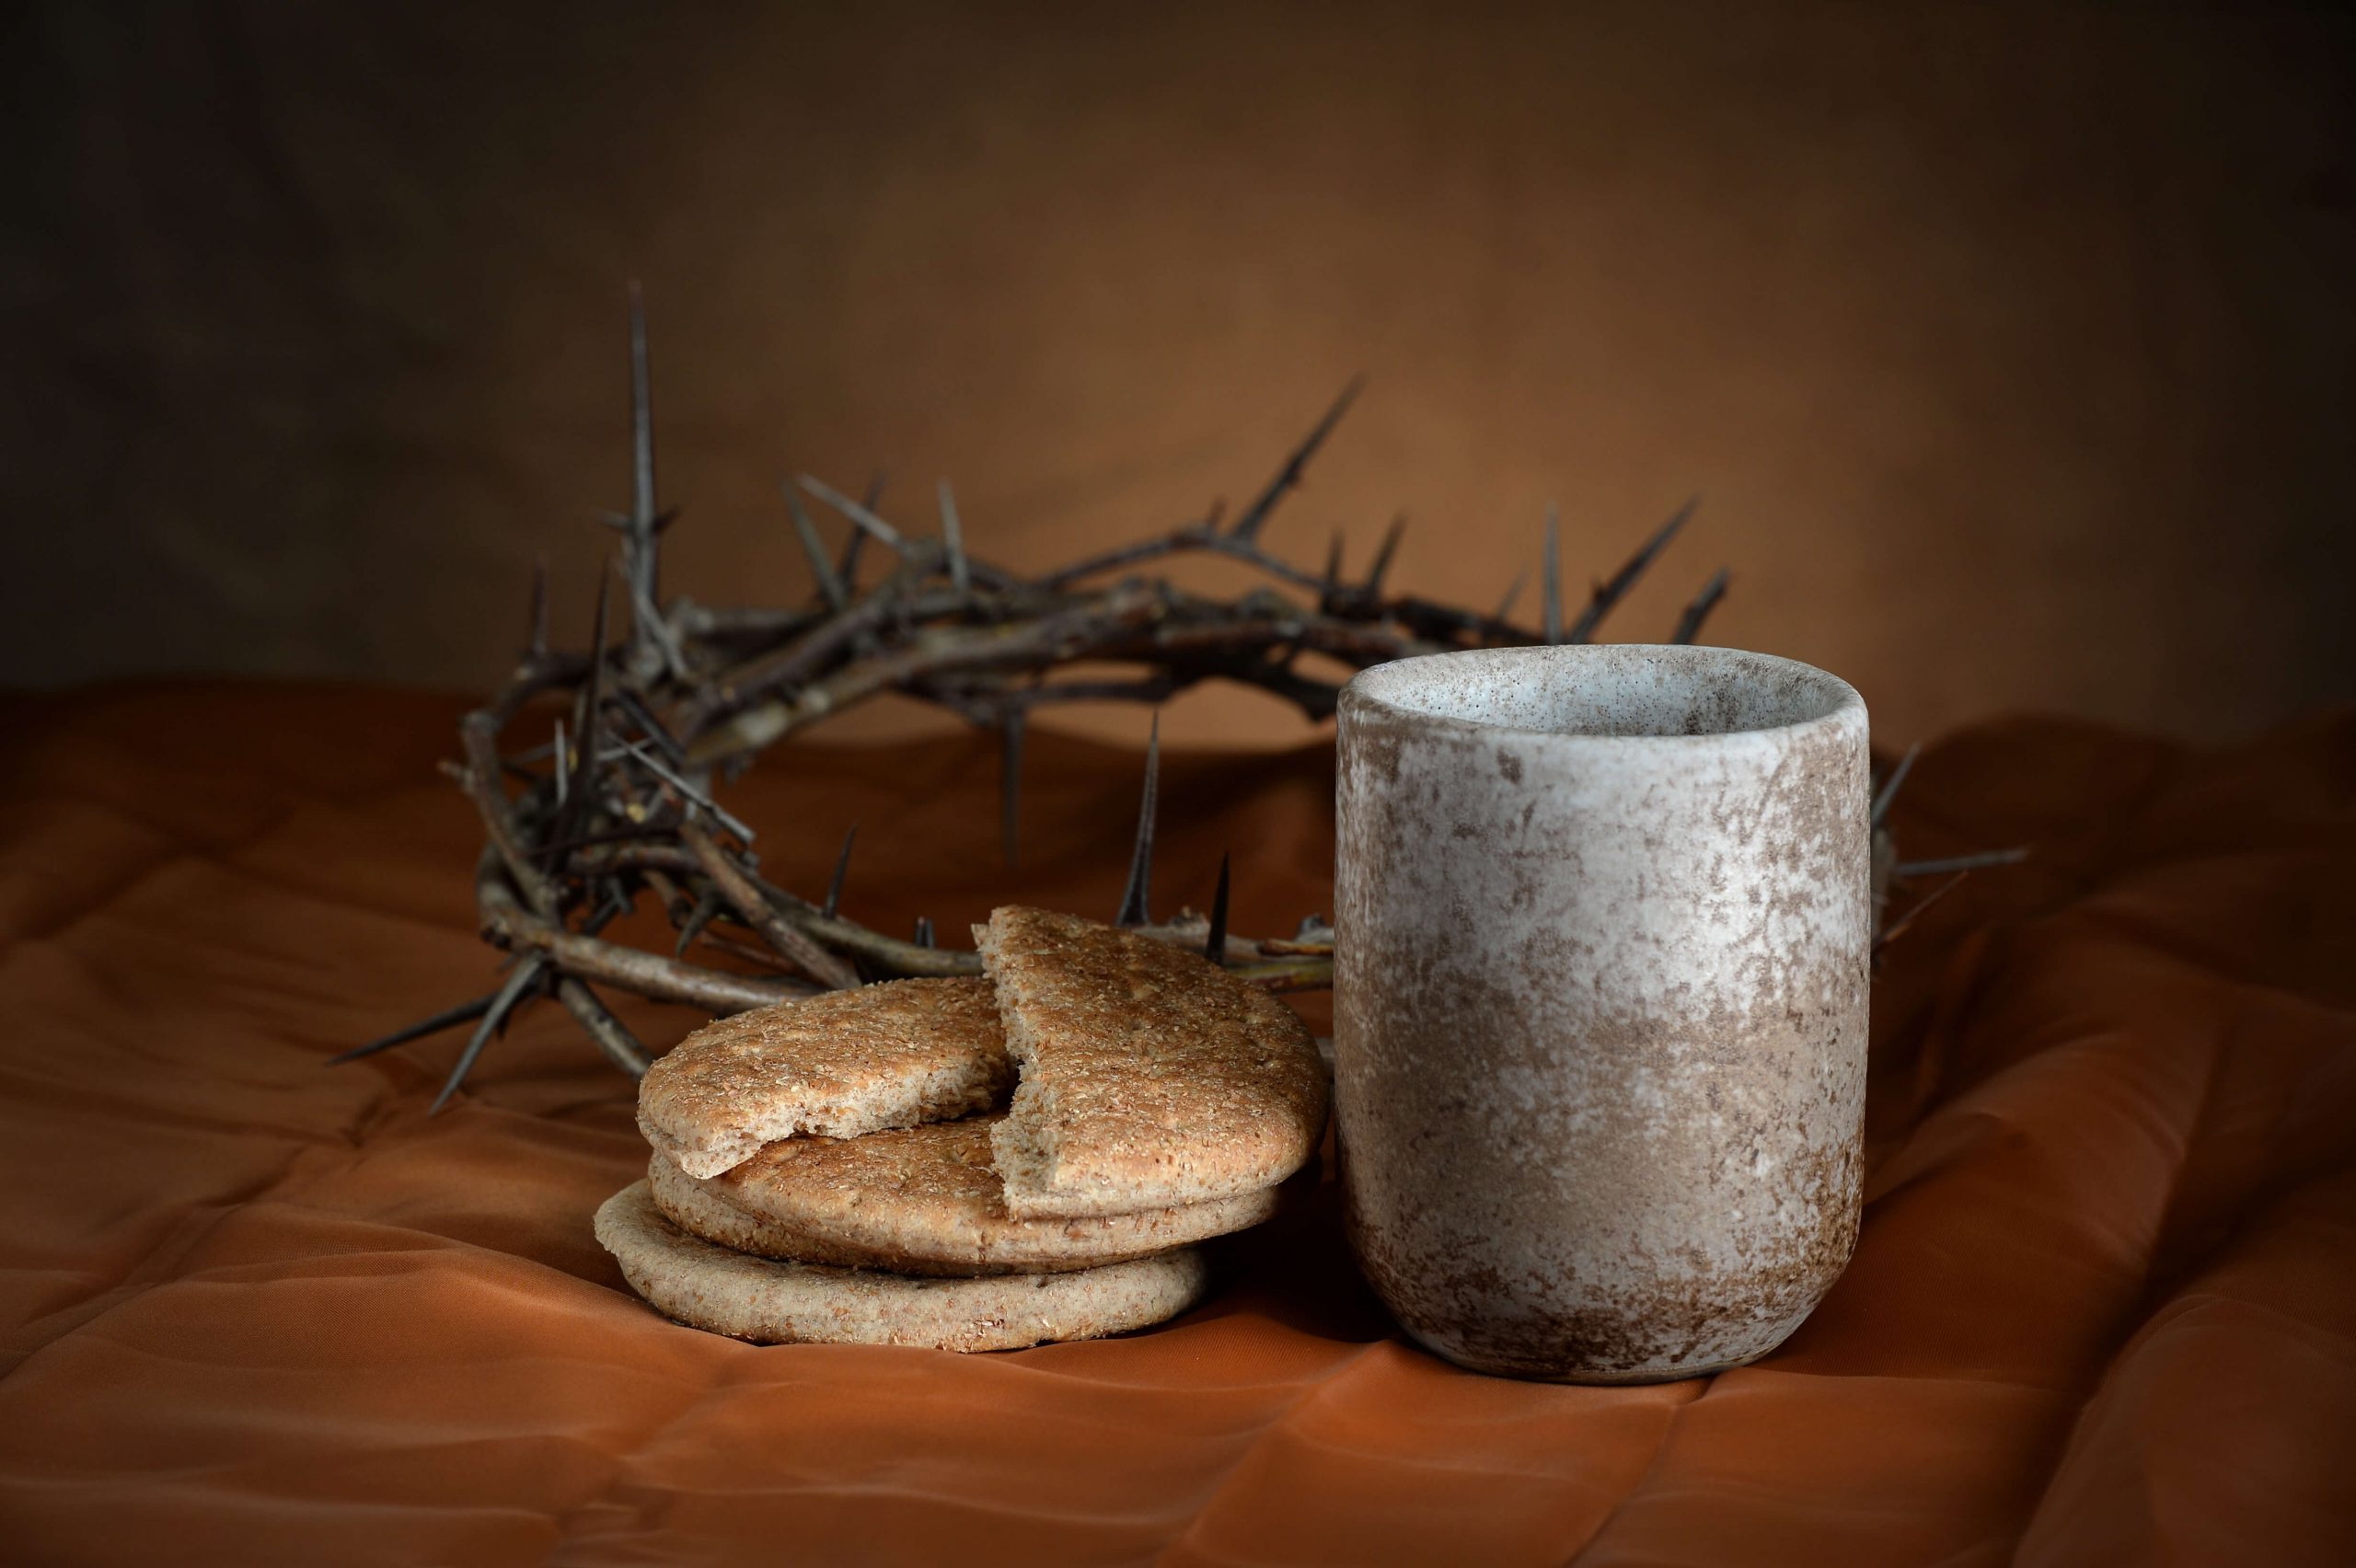 Communion and crown of thorns